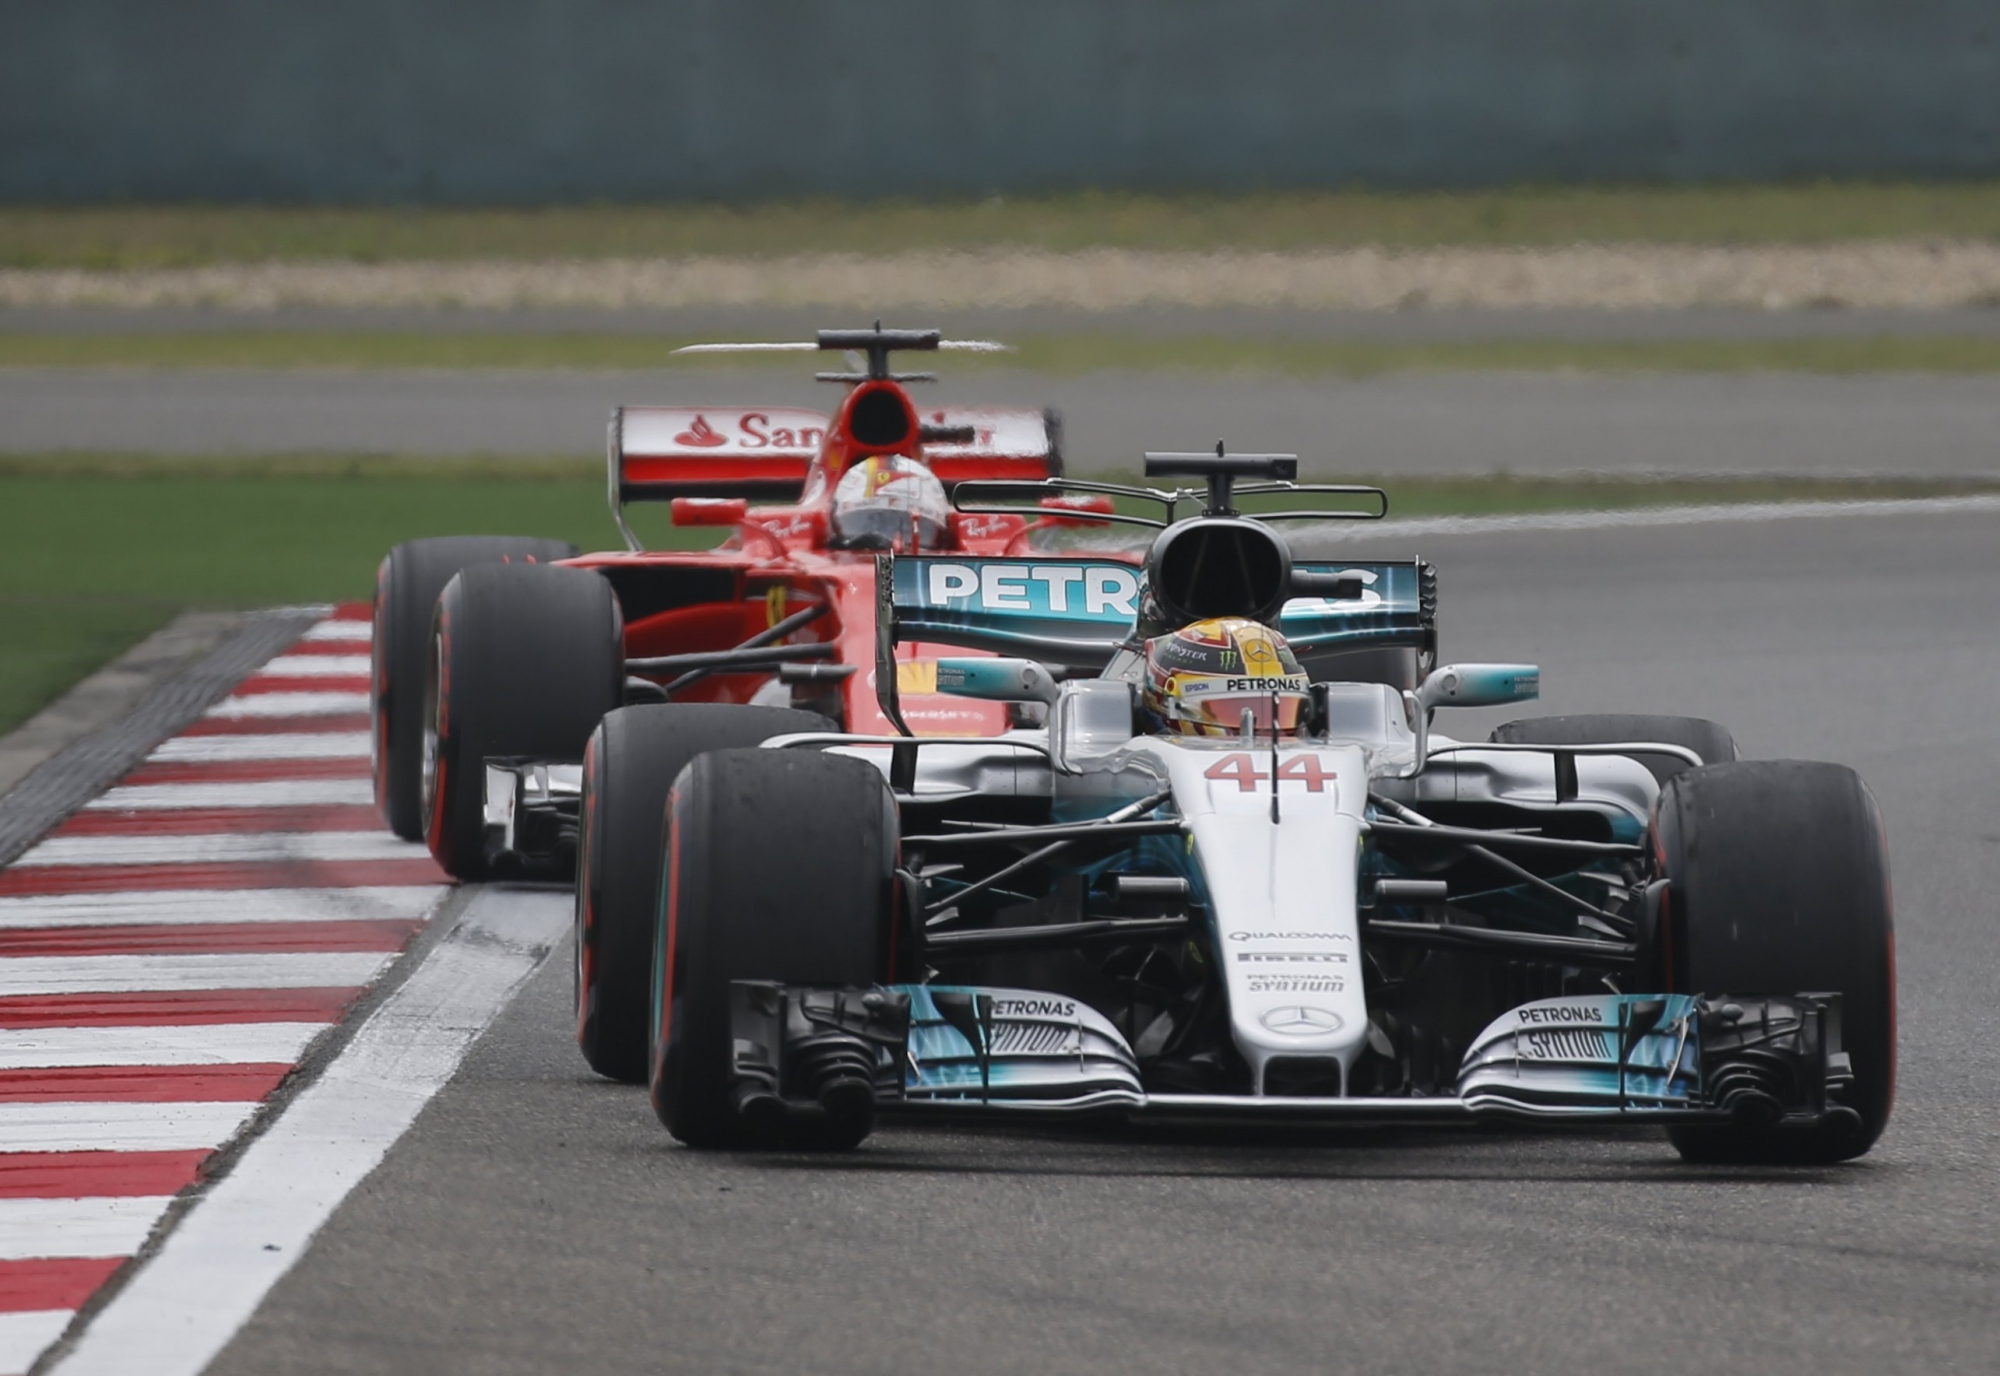 epa05896291 British Formula One driver Lewis Hamilton (front) of Mercedes AMG GP is followed by German Formula One driver Sebastian Vettel (rear) of Scuderia Ferrari during the third practice session at Shanghai international circuit in Shanghai, China, 08 April 2017. The 2017 Chinese Formula One Grand Prix will take place on 09 April.  EPA/LYNN BO BO